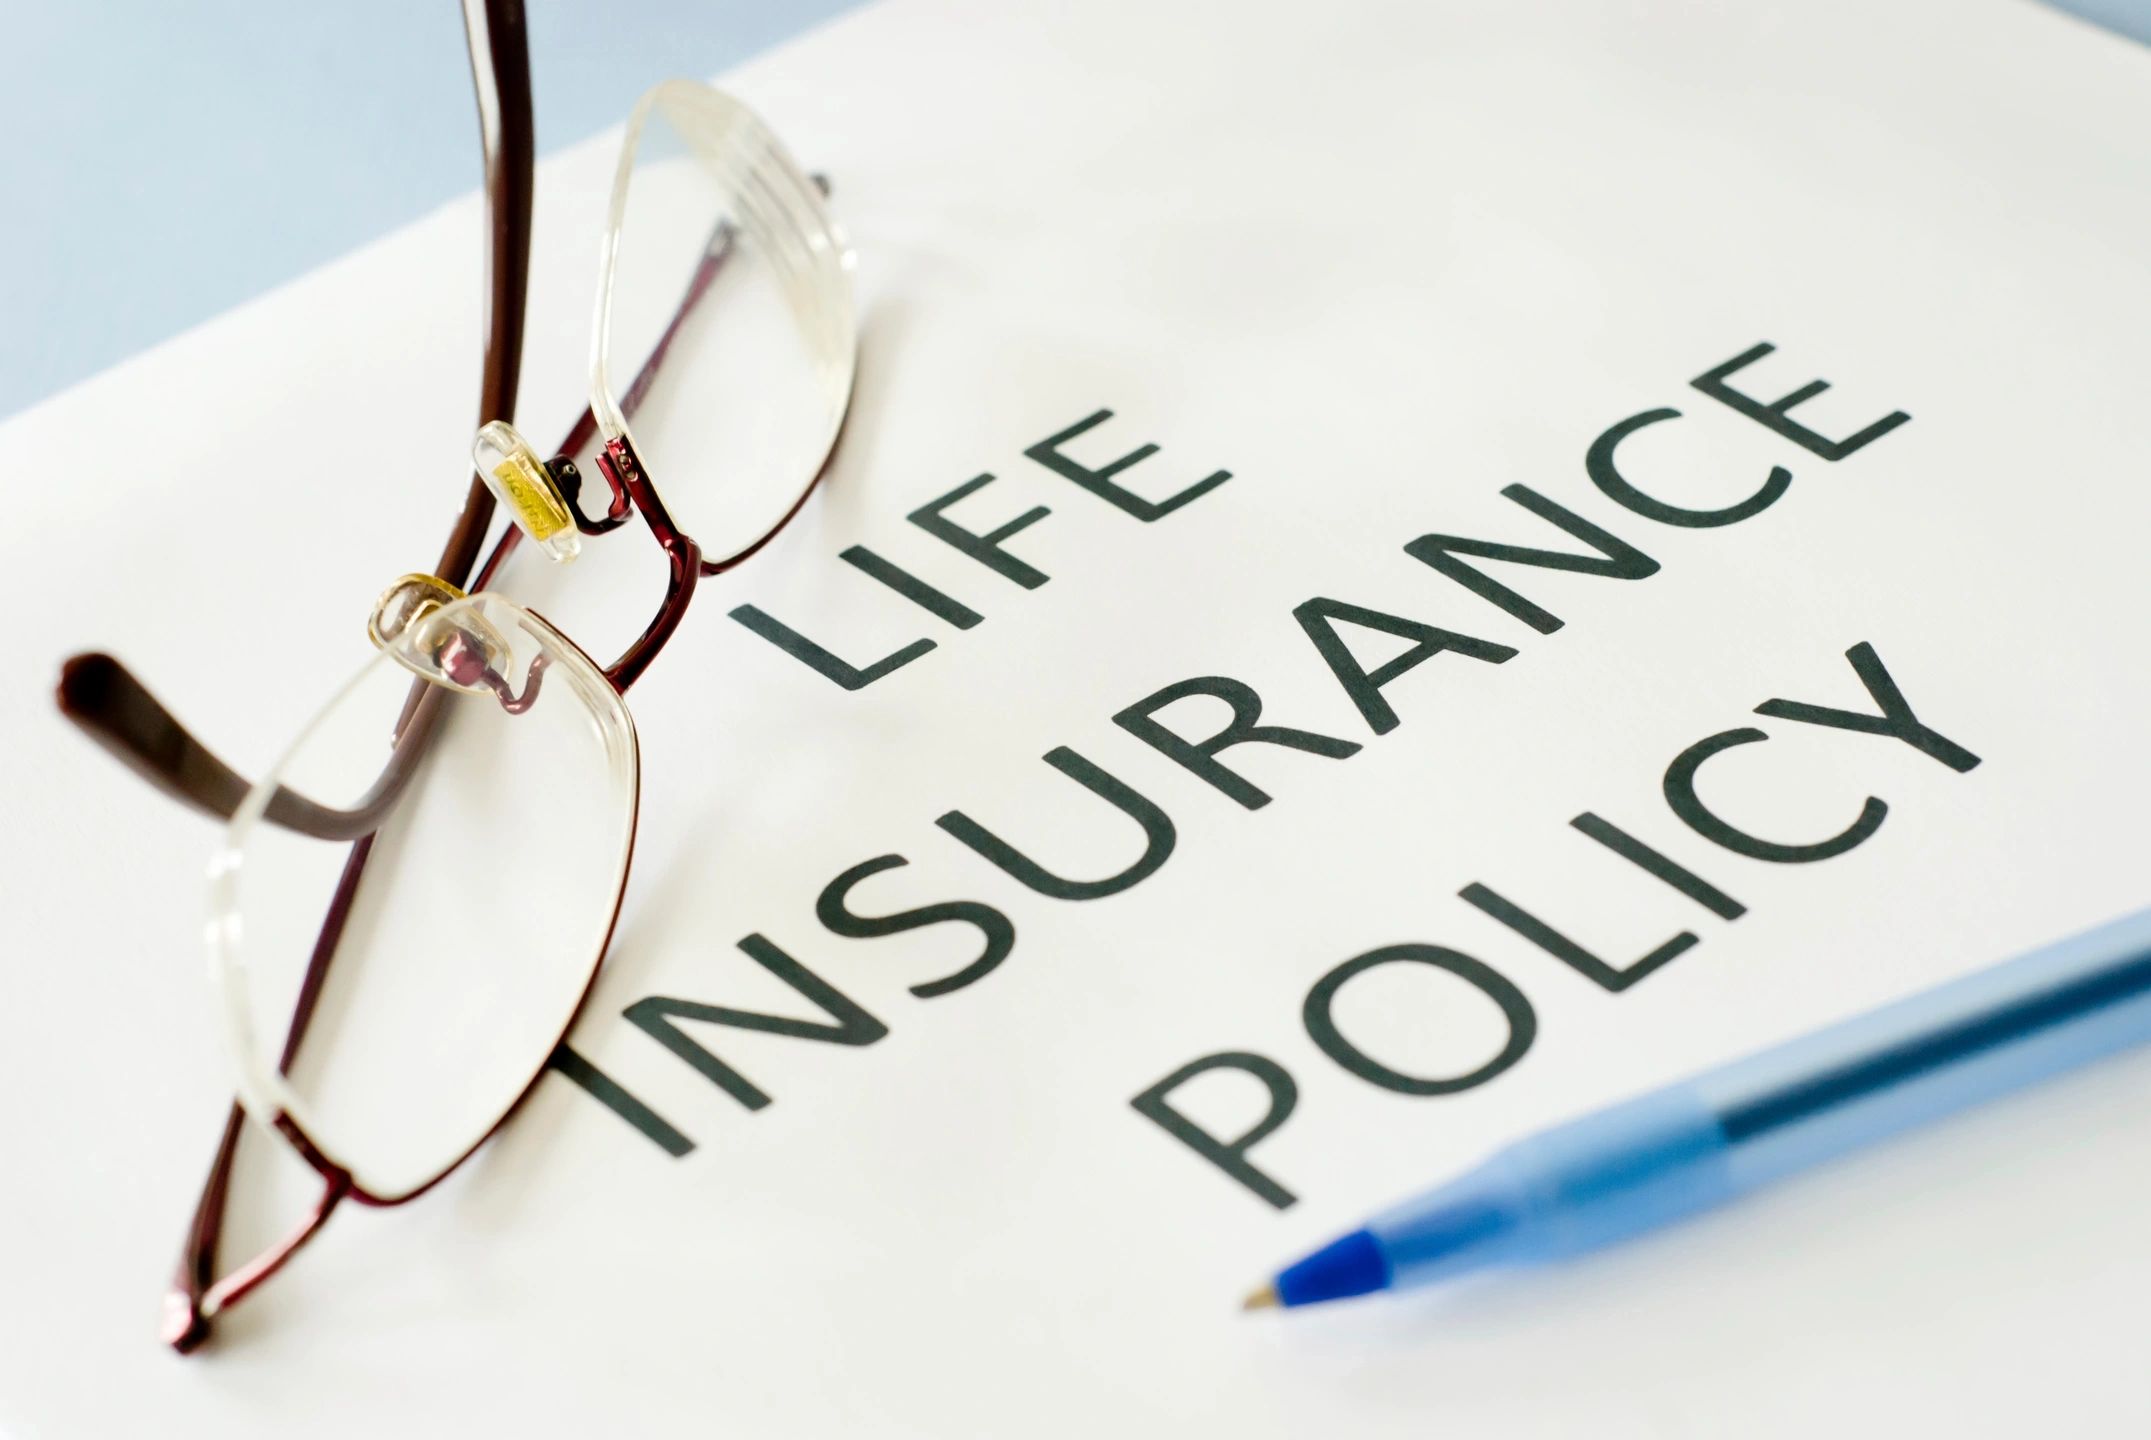 Life Insurance Policy. 